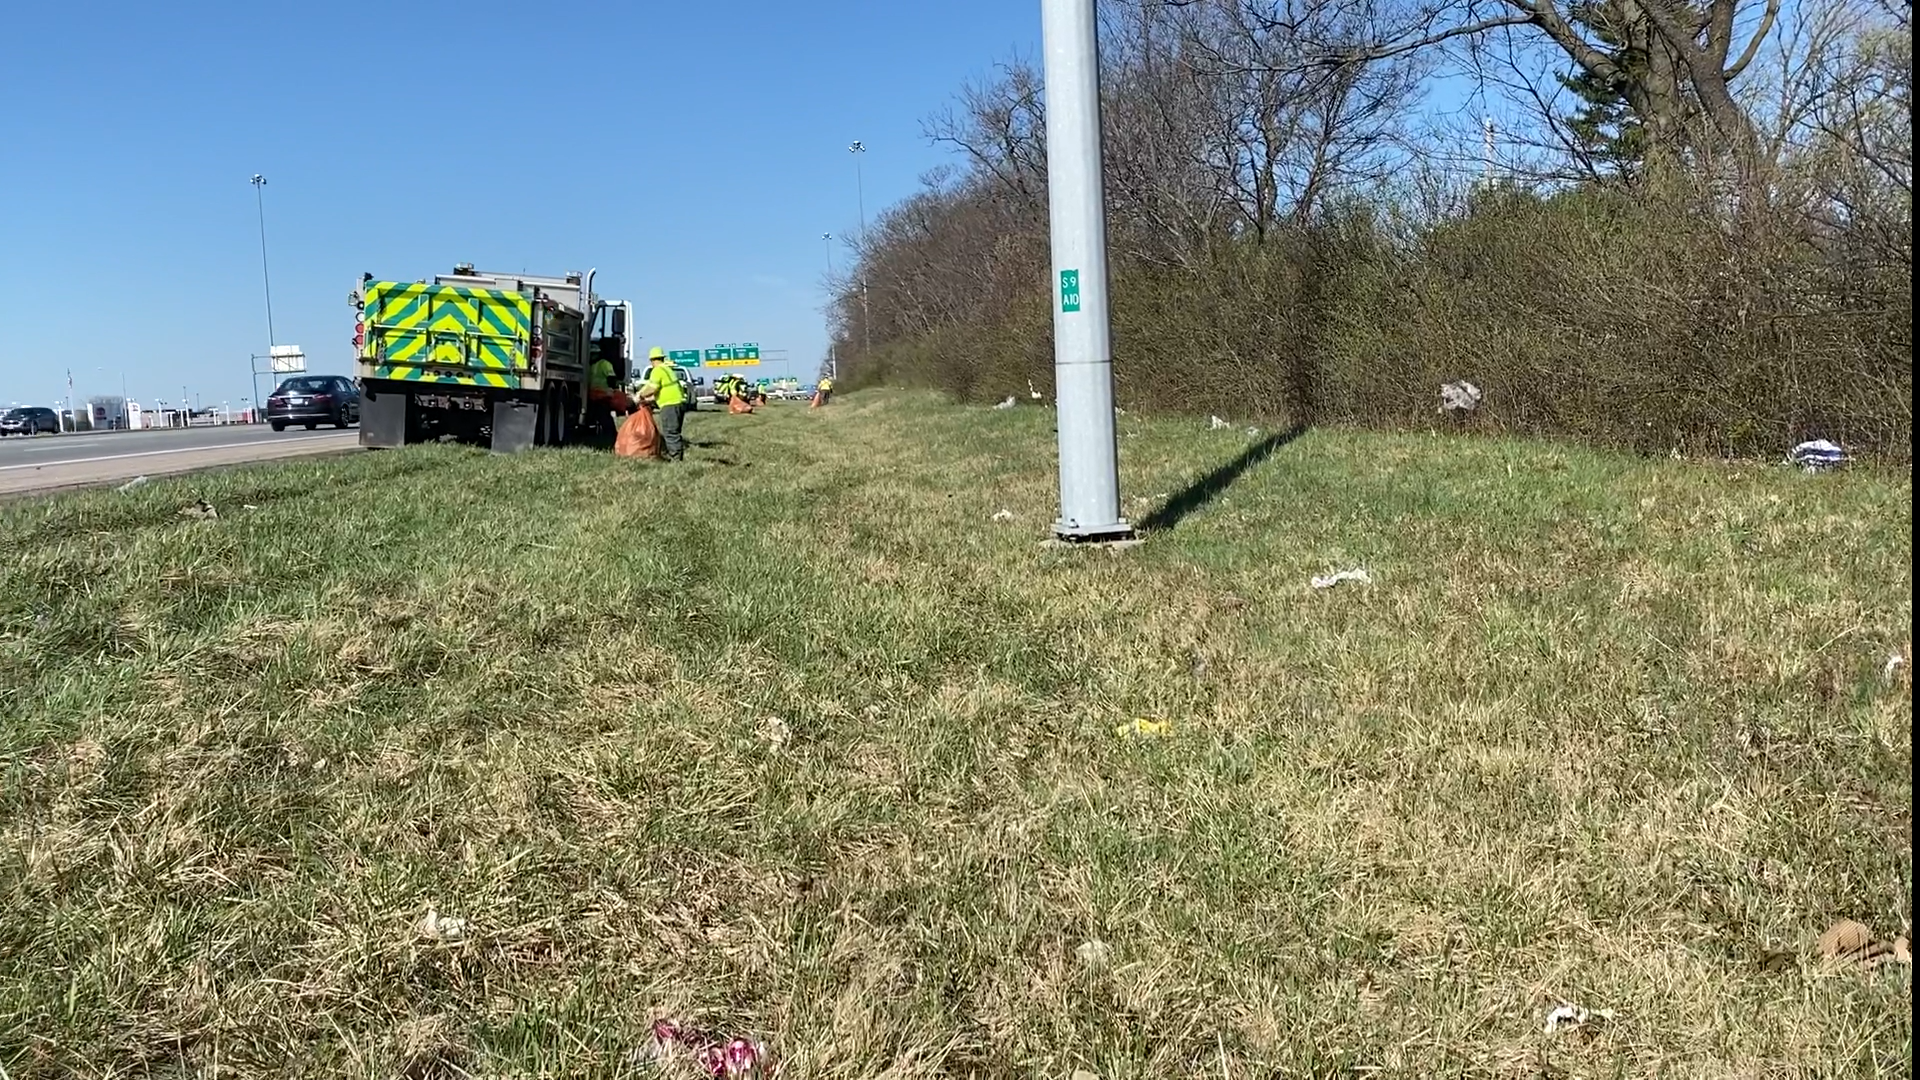 In the past nine months, ODOT crews in central Ohio have picked up more than 50,000 bags of litter, half in Franklin County alone.